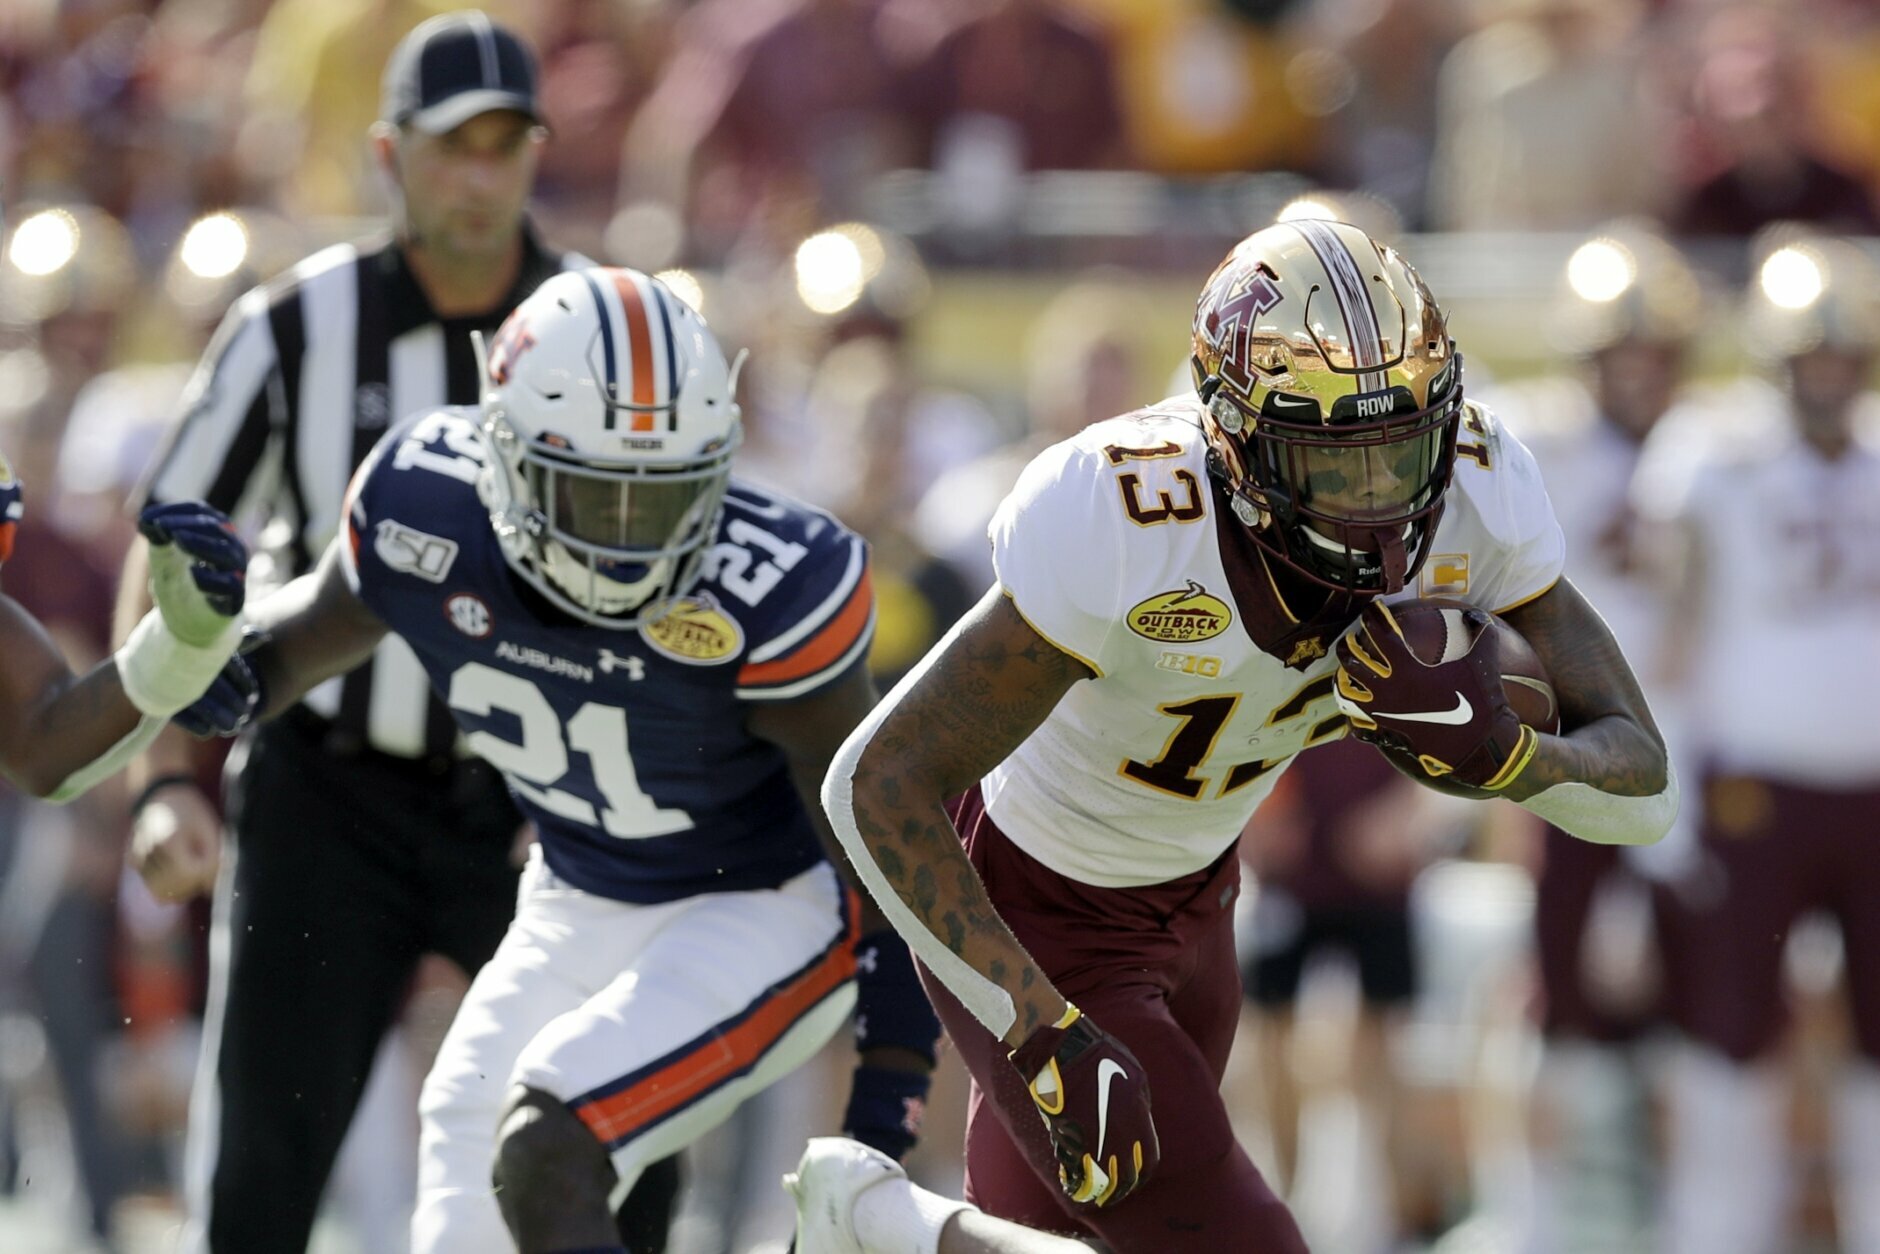 FILE - In this Jan. 1, 2020, file photo, Minnesota wide receiver Rashod Bateman (13) turns upfield against Auburn during the first half of the Outback Bowl NCAA college football gam in Tampa, Fla. Baltimore ranked last in the NFL averaging 171.2 yards passing per game and had the fewest pass attempts with 406 last season. That’s partly because the running game was so proficient behind quarterback Lamar Jackson, the catalyst for the league’s No. 1 rushing attack (191.9 yards per game) for the second straight season. (AP Photo/Chris O'Meara, File)